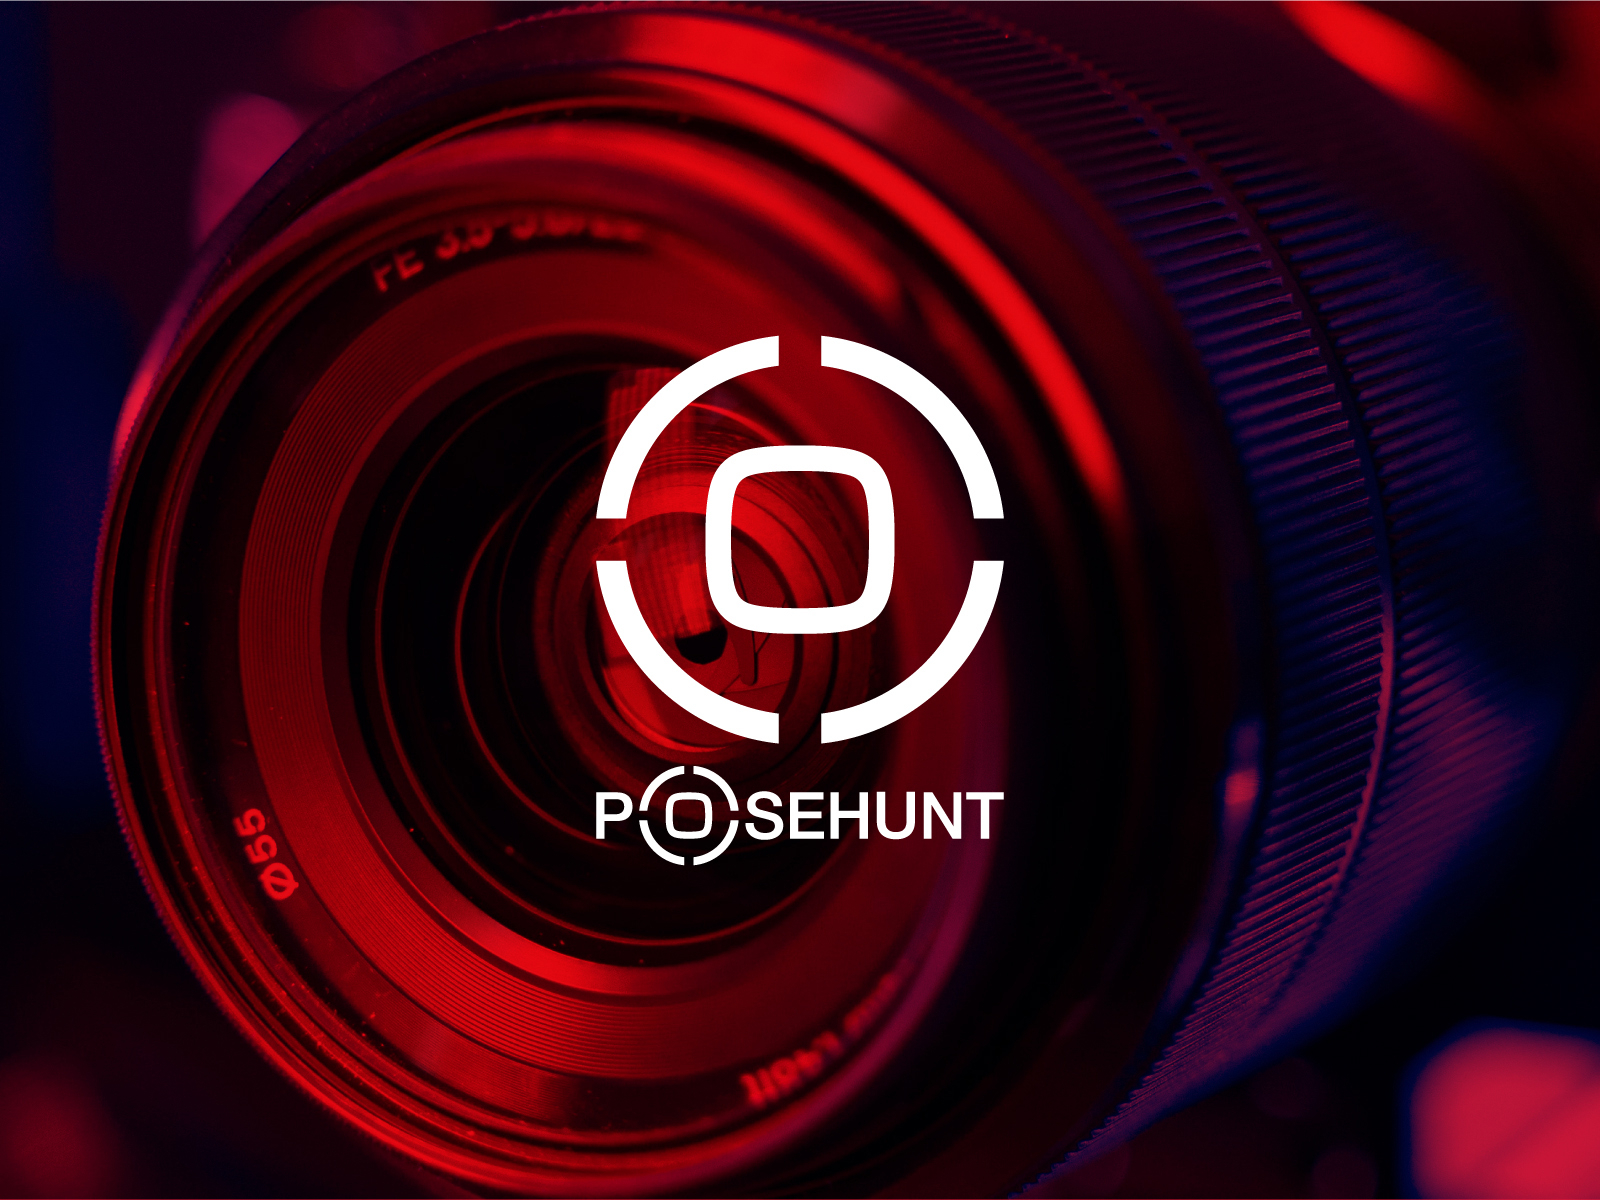 Posehunt photography logo by unidesign 333 on Dribbble